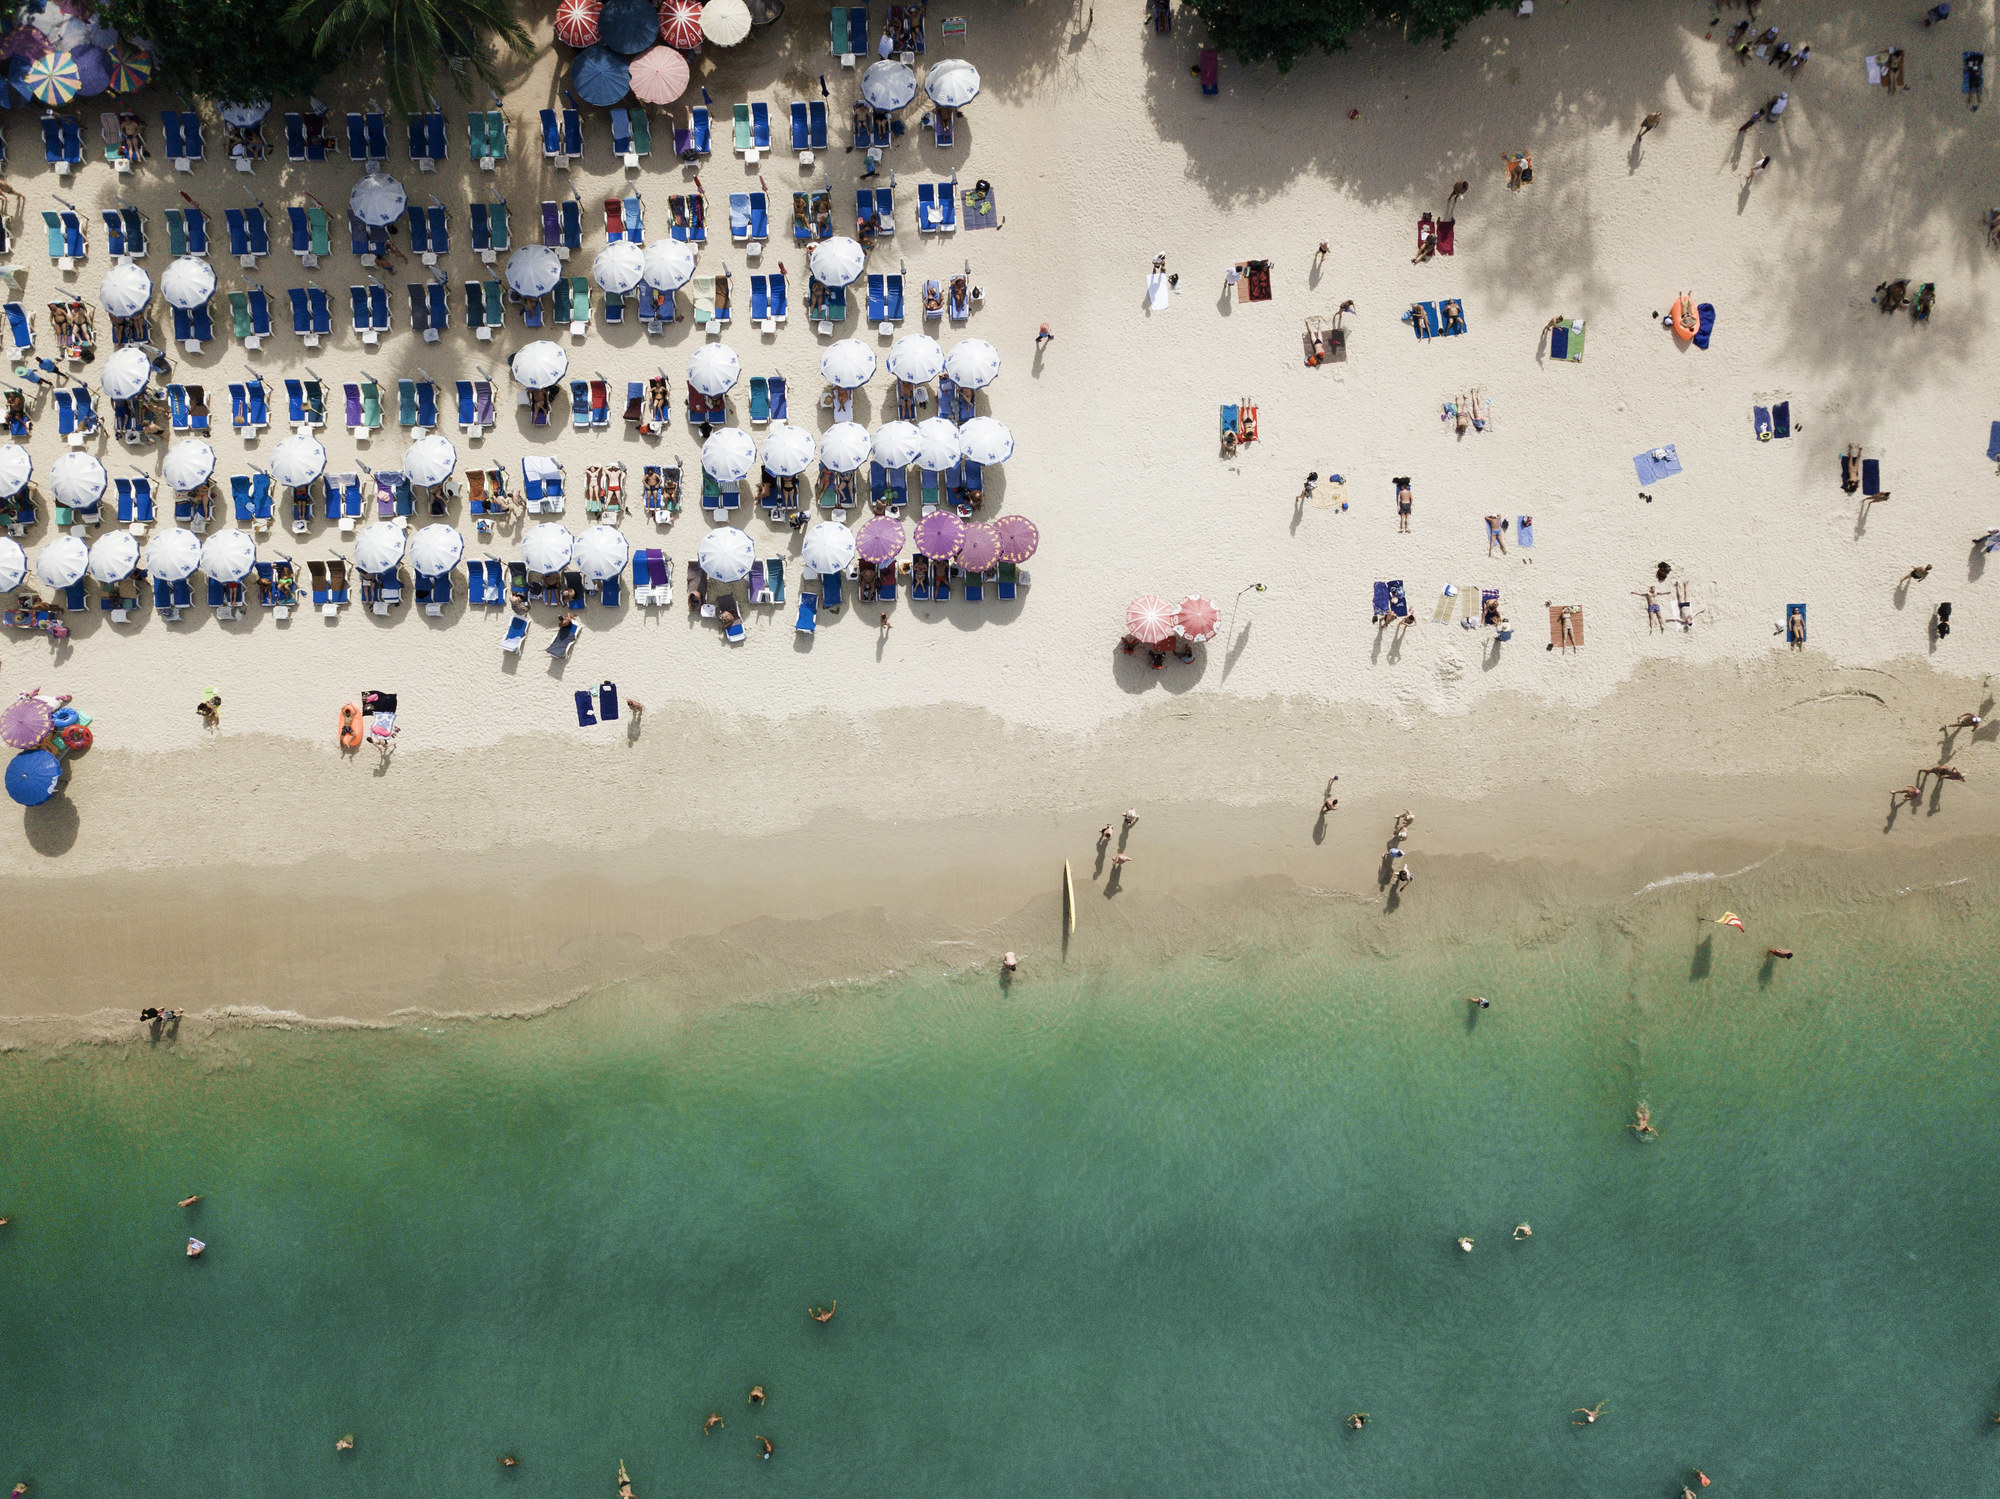 An aerial view of a crowded beach in Phuket.